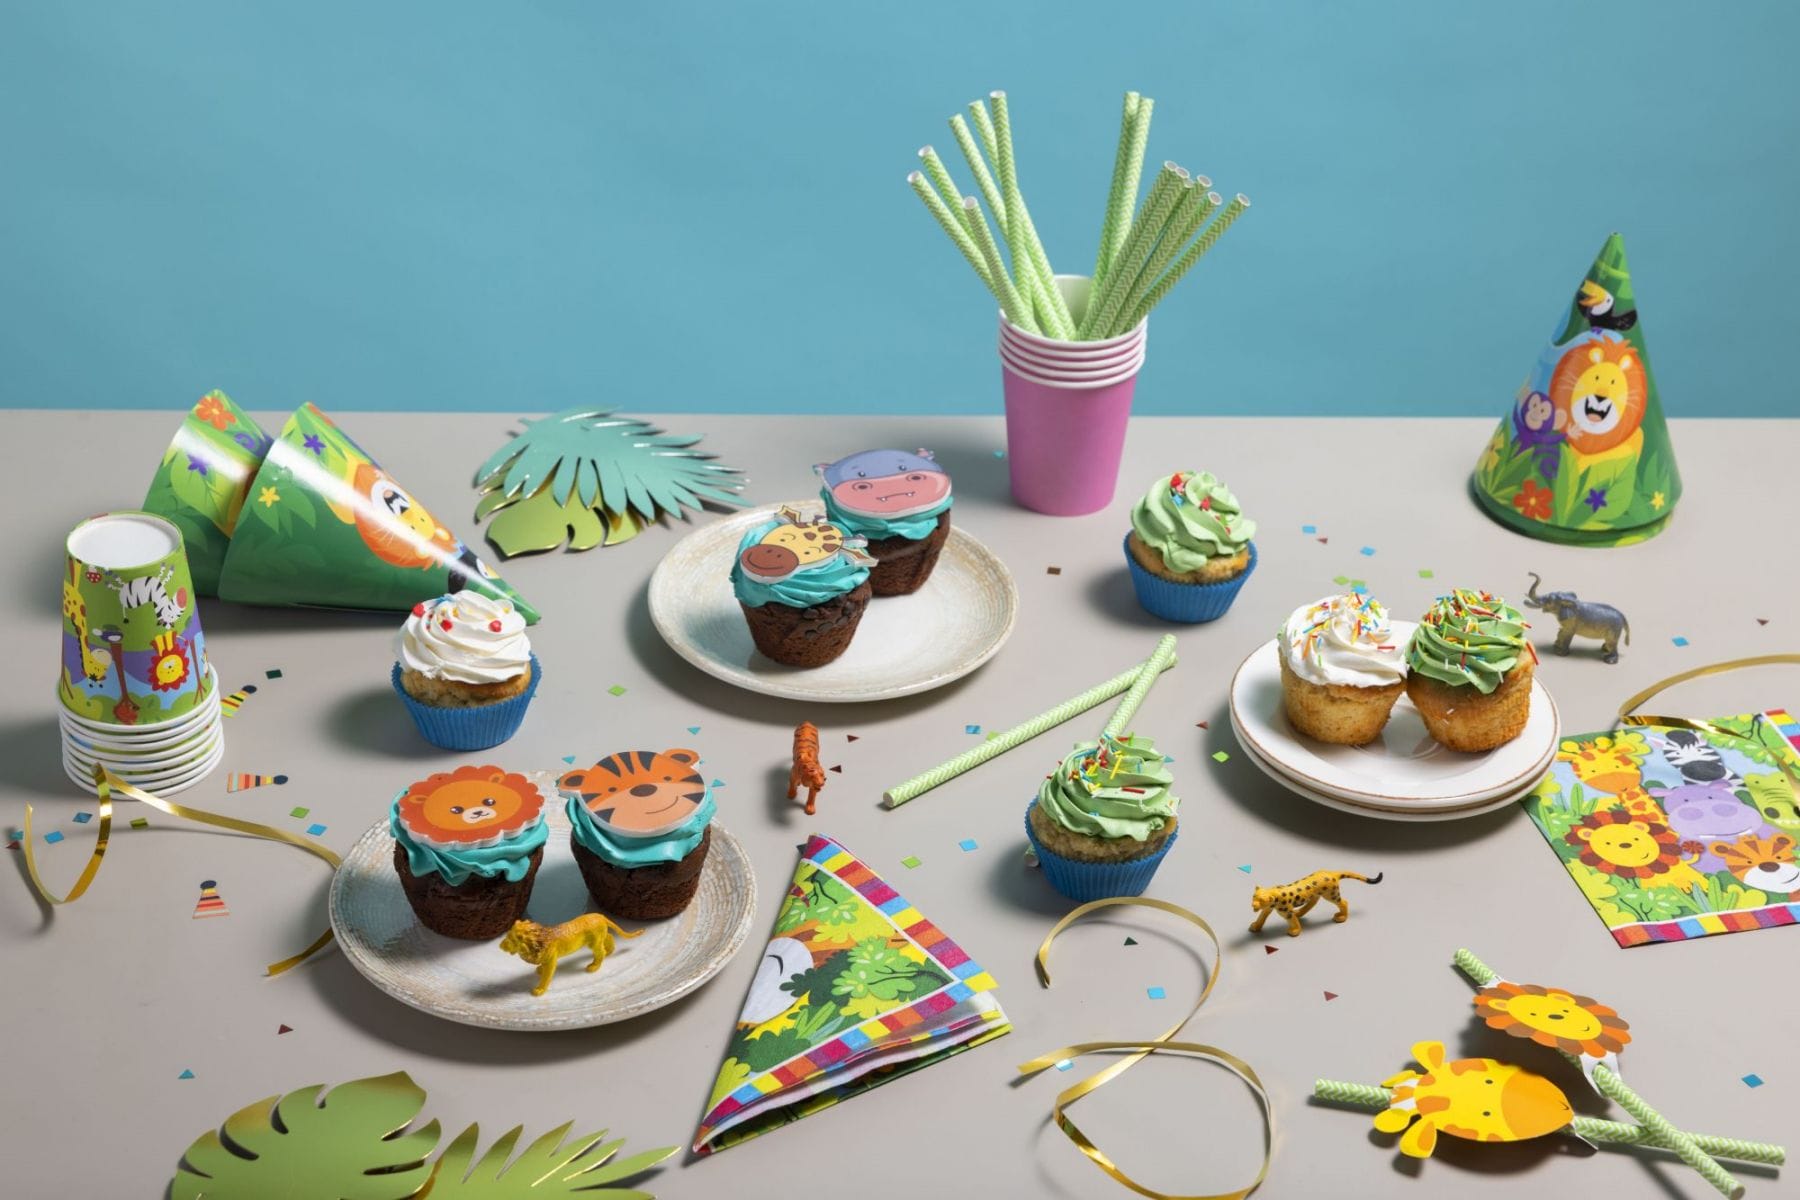 Delicious jungle hunting party cupcake arrangements.